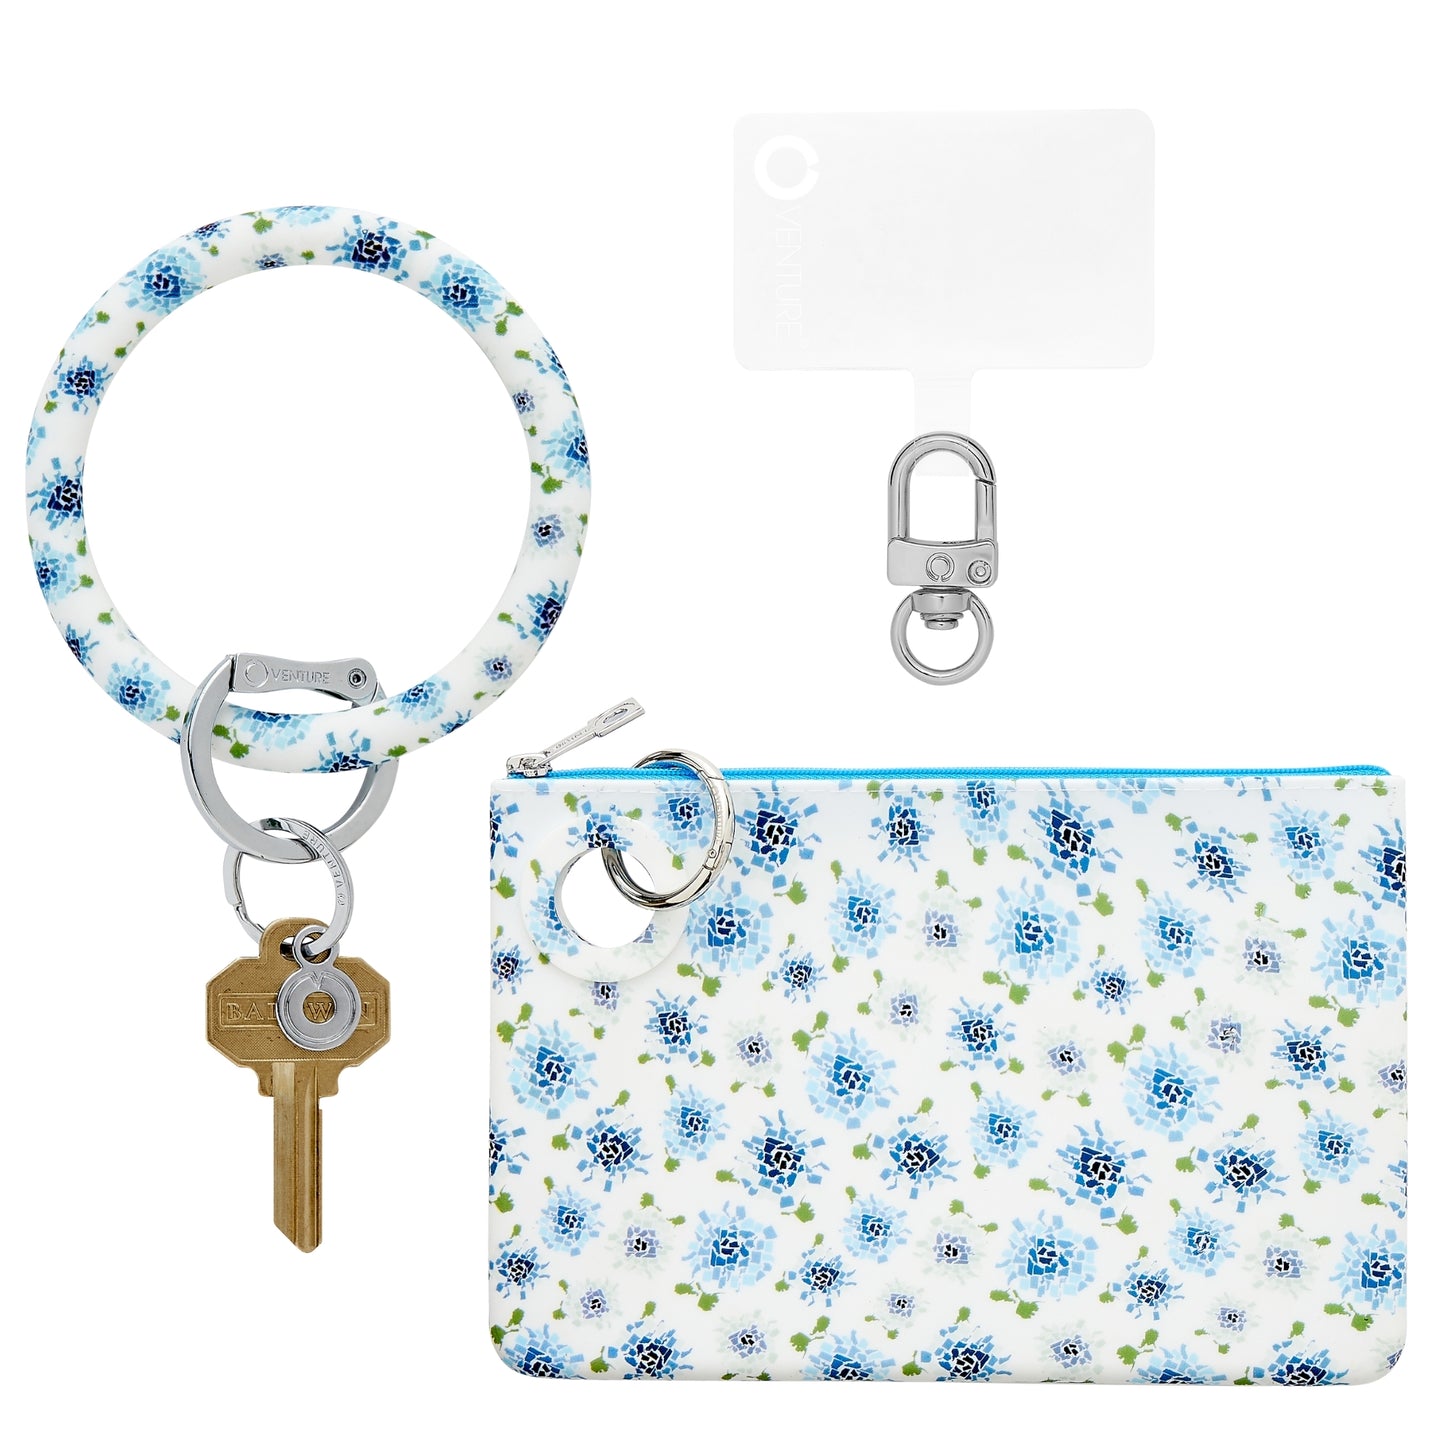 Fifty States Blue - Large Silicone Pouch and Big O Key Ring Set - Oventure which includes a Big O Key Ring, a large silicone pouch and a phone connector. These all have the blue hydrangea print.